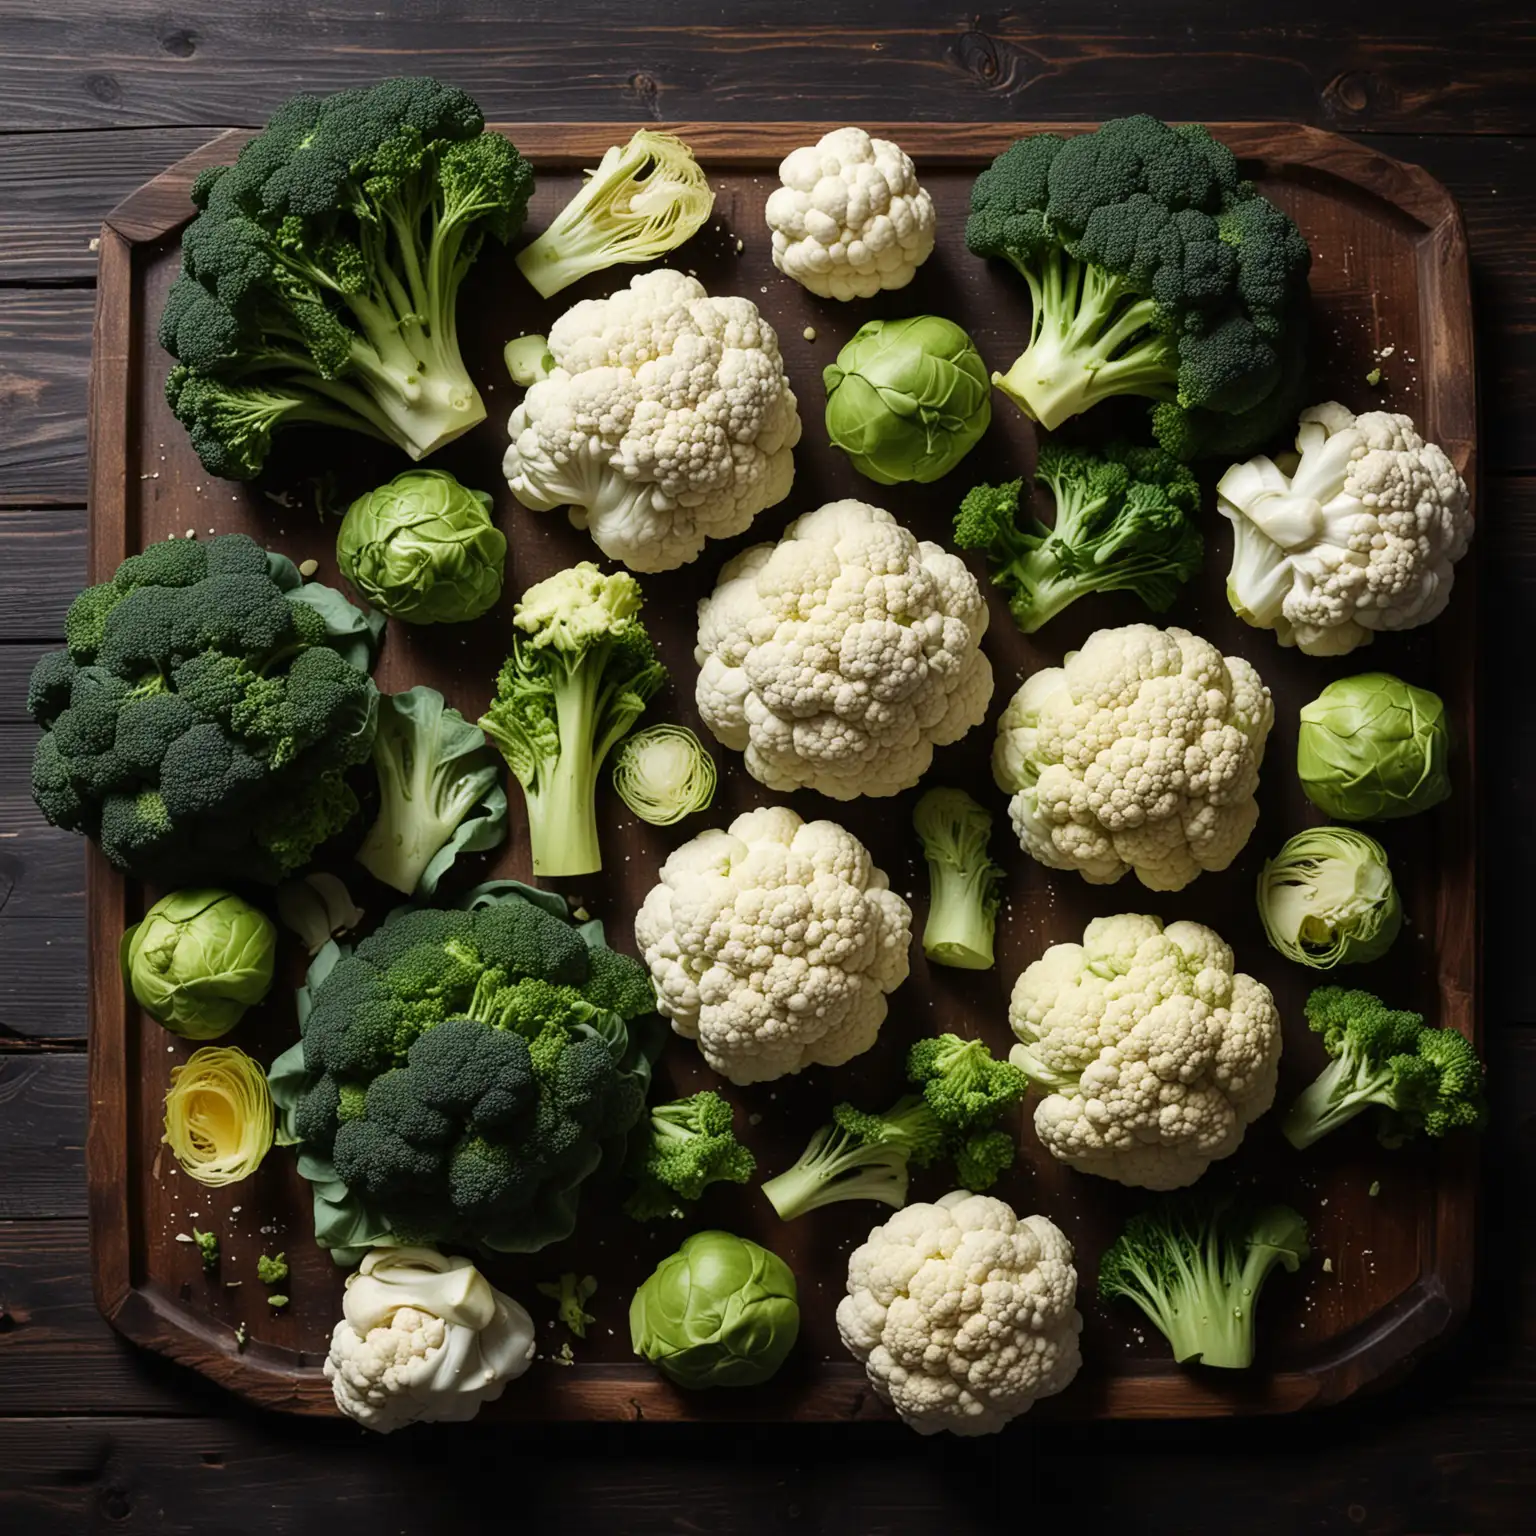 appetizing, attractive arrangement of foods on dark wooden table. foods to include: broccoli, cauliflower, bok choy, Brussels sprouts